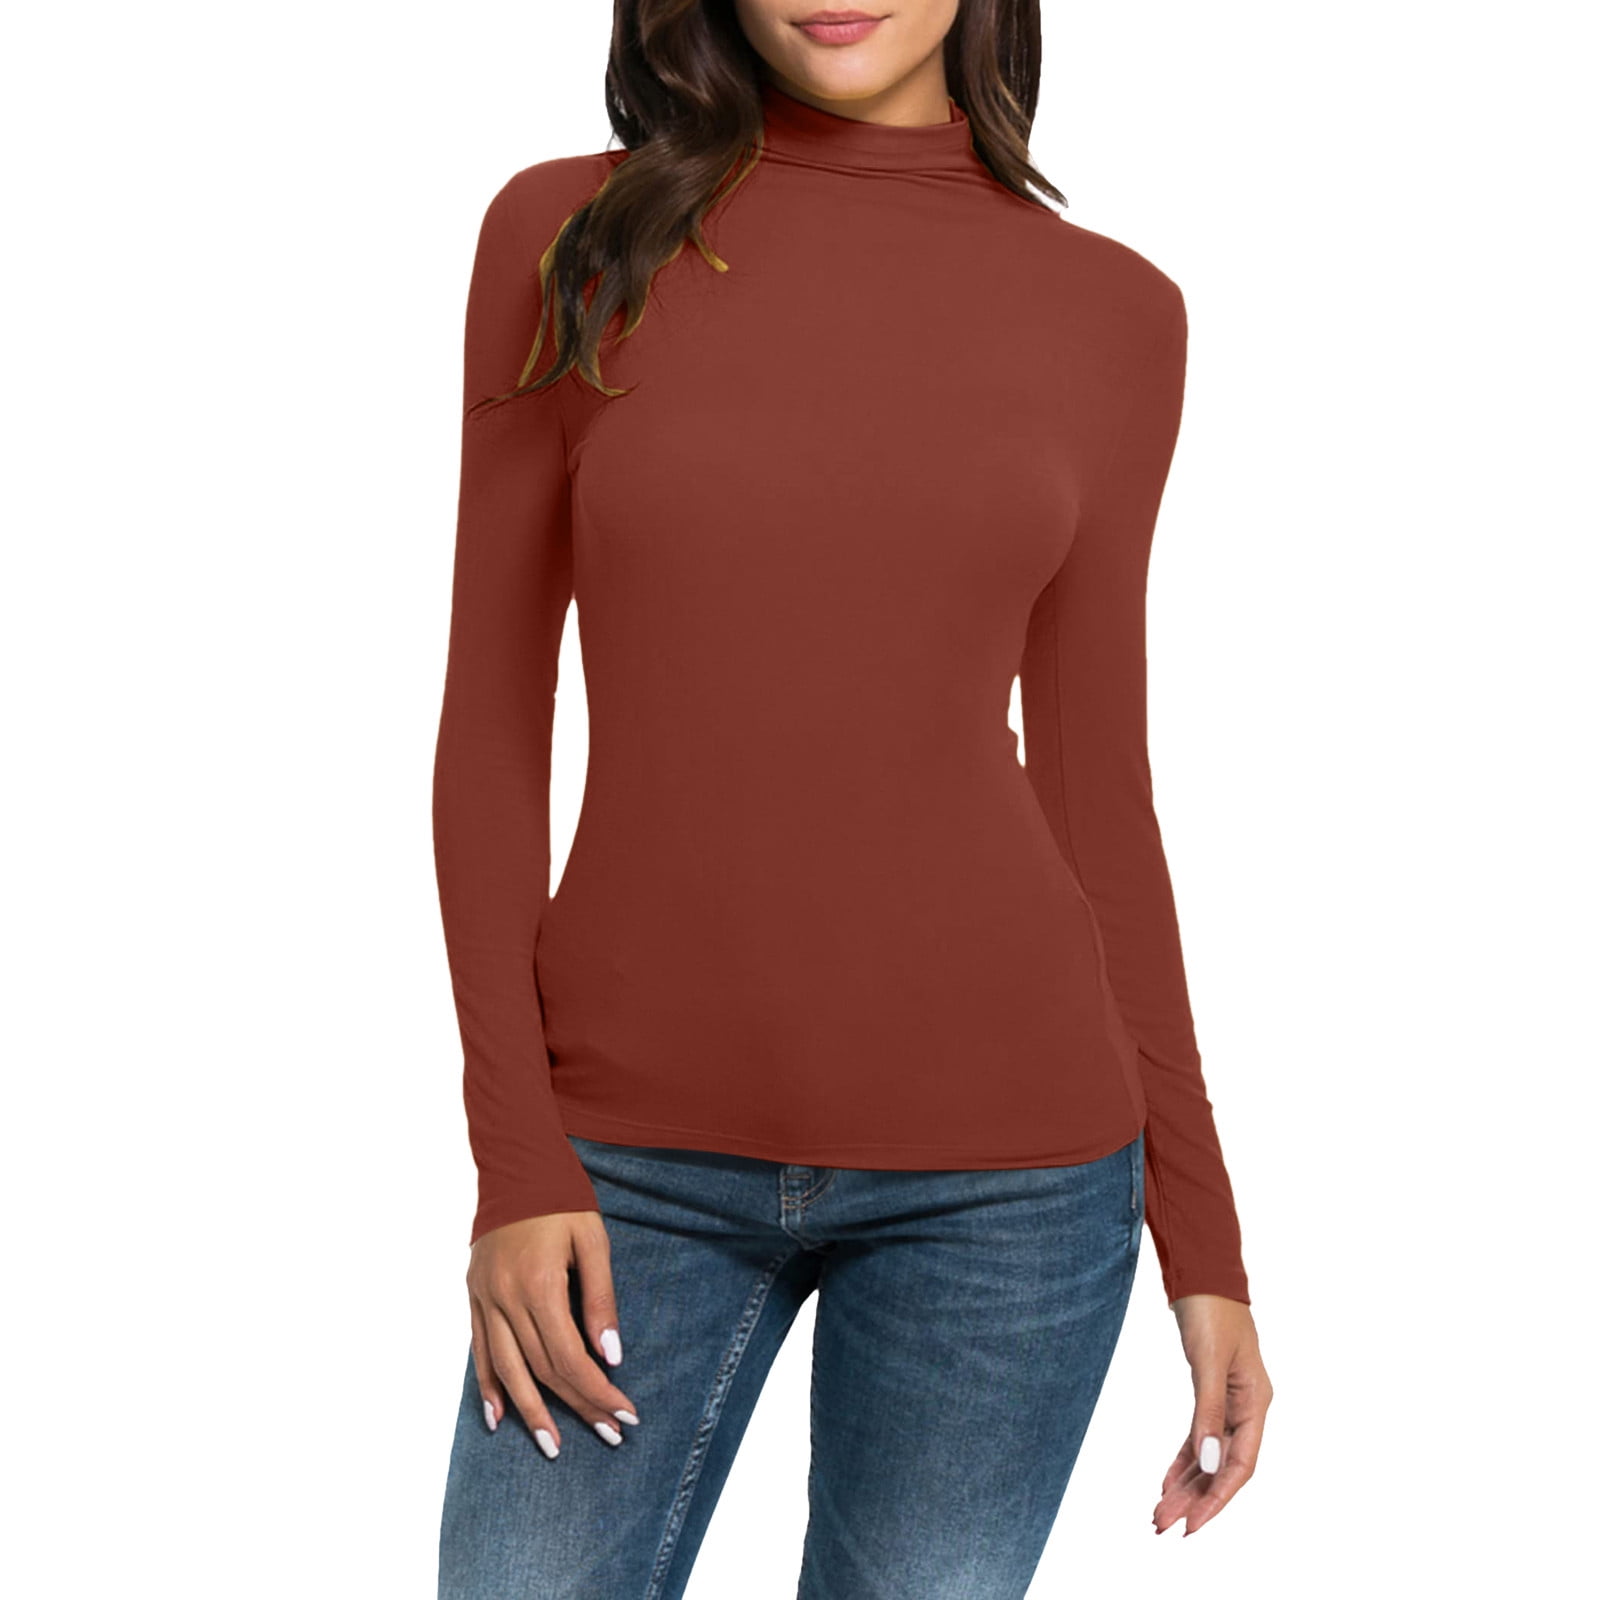 Luxalzxs Womens Long Sleeve Turtleneck Tops Solid Color Slim Fitted ...